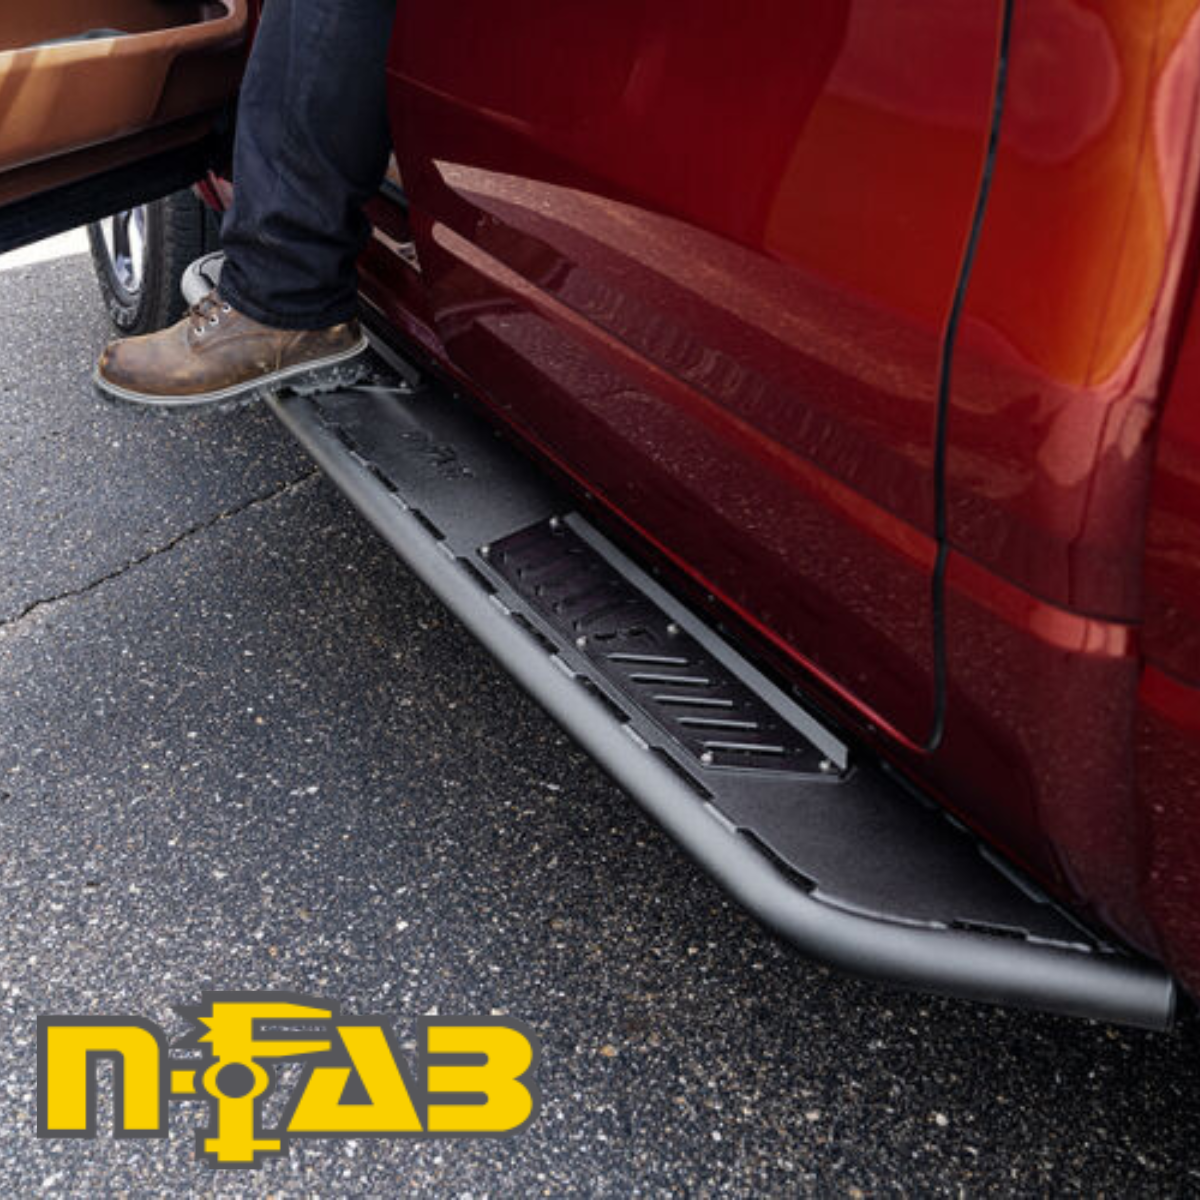 Personalize your ride with N-Fab’s Roan Running Boards. N-Fab’s Roan Running Boards give your ride a look that’s too tough to tame. Constructed with a sturdy 1.75-inch OD perimeter tube supporting a fully-welded 12-gauge steel top plate, the Roan finds the line between a conventional running board and an armored side step. The extra large, 5.5” x21” louvered step plate is posited at each door, allowing for easy and secure vehicle access in any weather condition. Roan Running Boards come standard in cab-length and feature a textured black powder coat finish and they have an adjustable mounting system designed for stock or lifted vehicles. Visit us and start customizing your vehicle today with N-Fab’s Roan Running Boards.